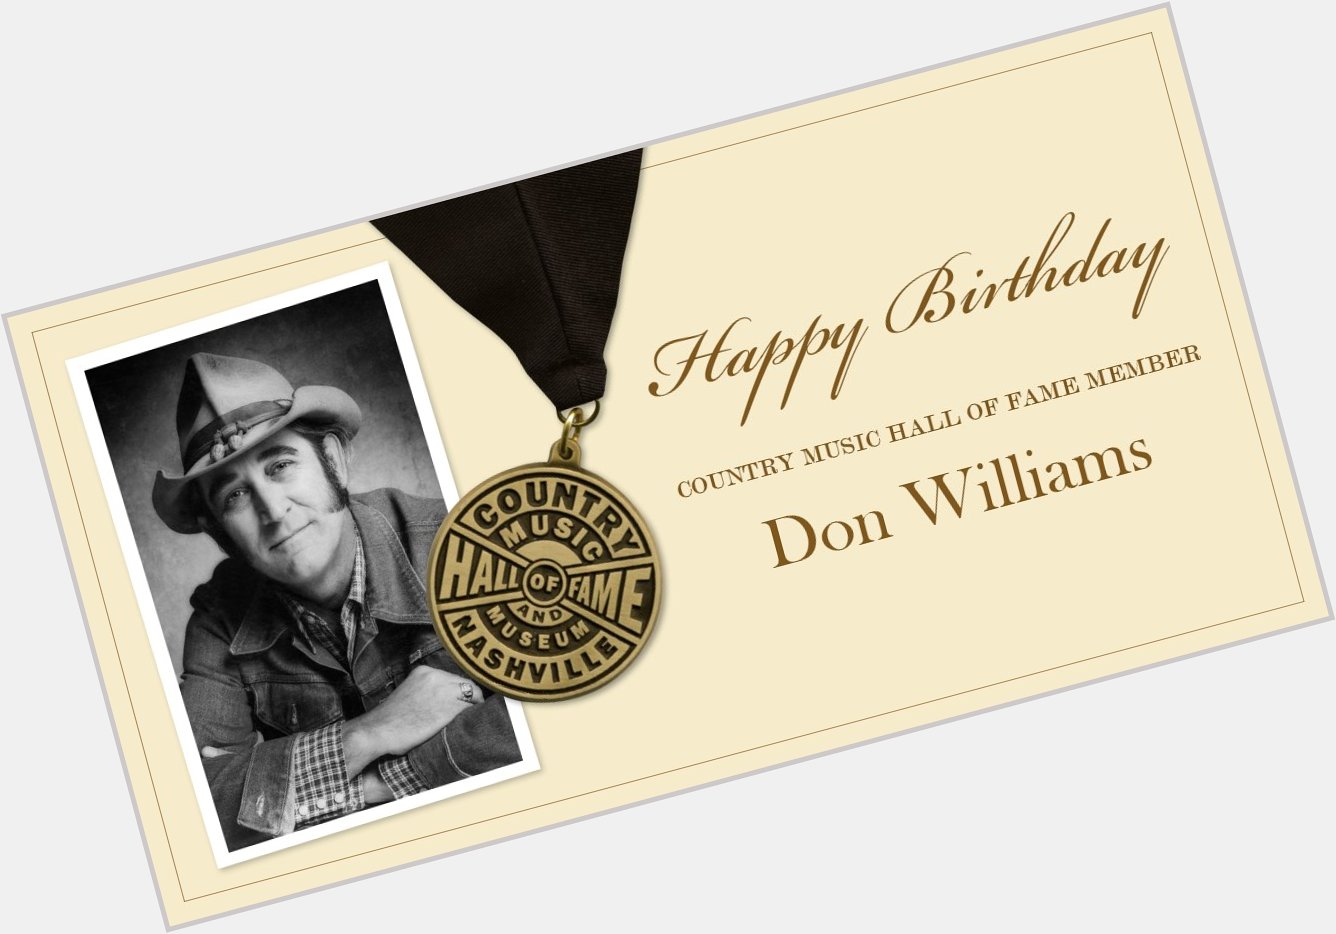 Join us in wishing CMHOF member, country\s \"Gentle Giant\", Don Williams a very happy birthday! 